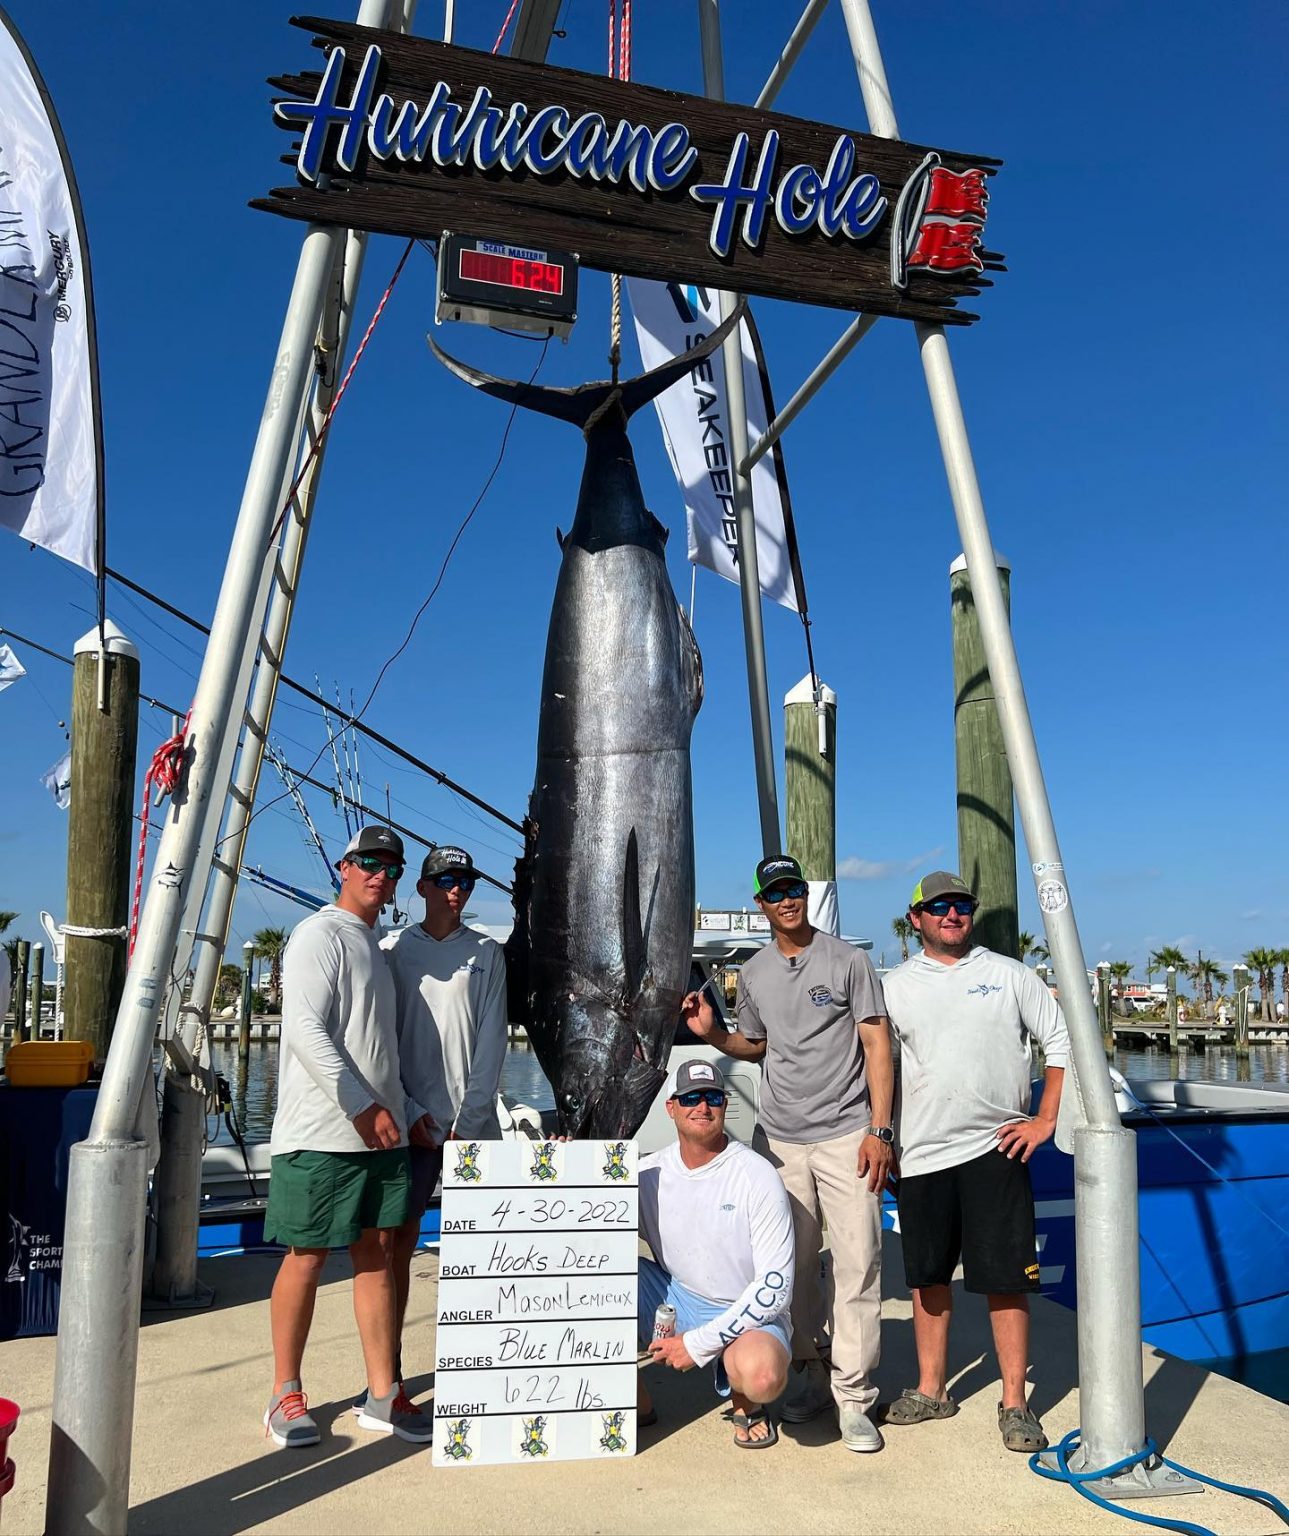 First Blue Marlin Ever Weighed at Hurricane Hole at Louisiana Gulf